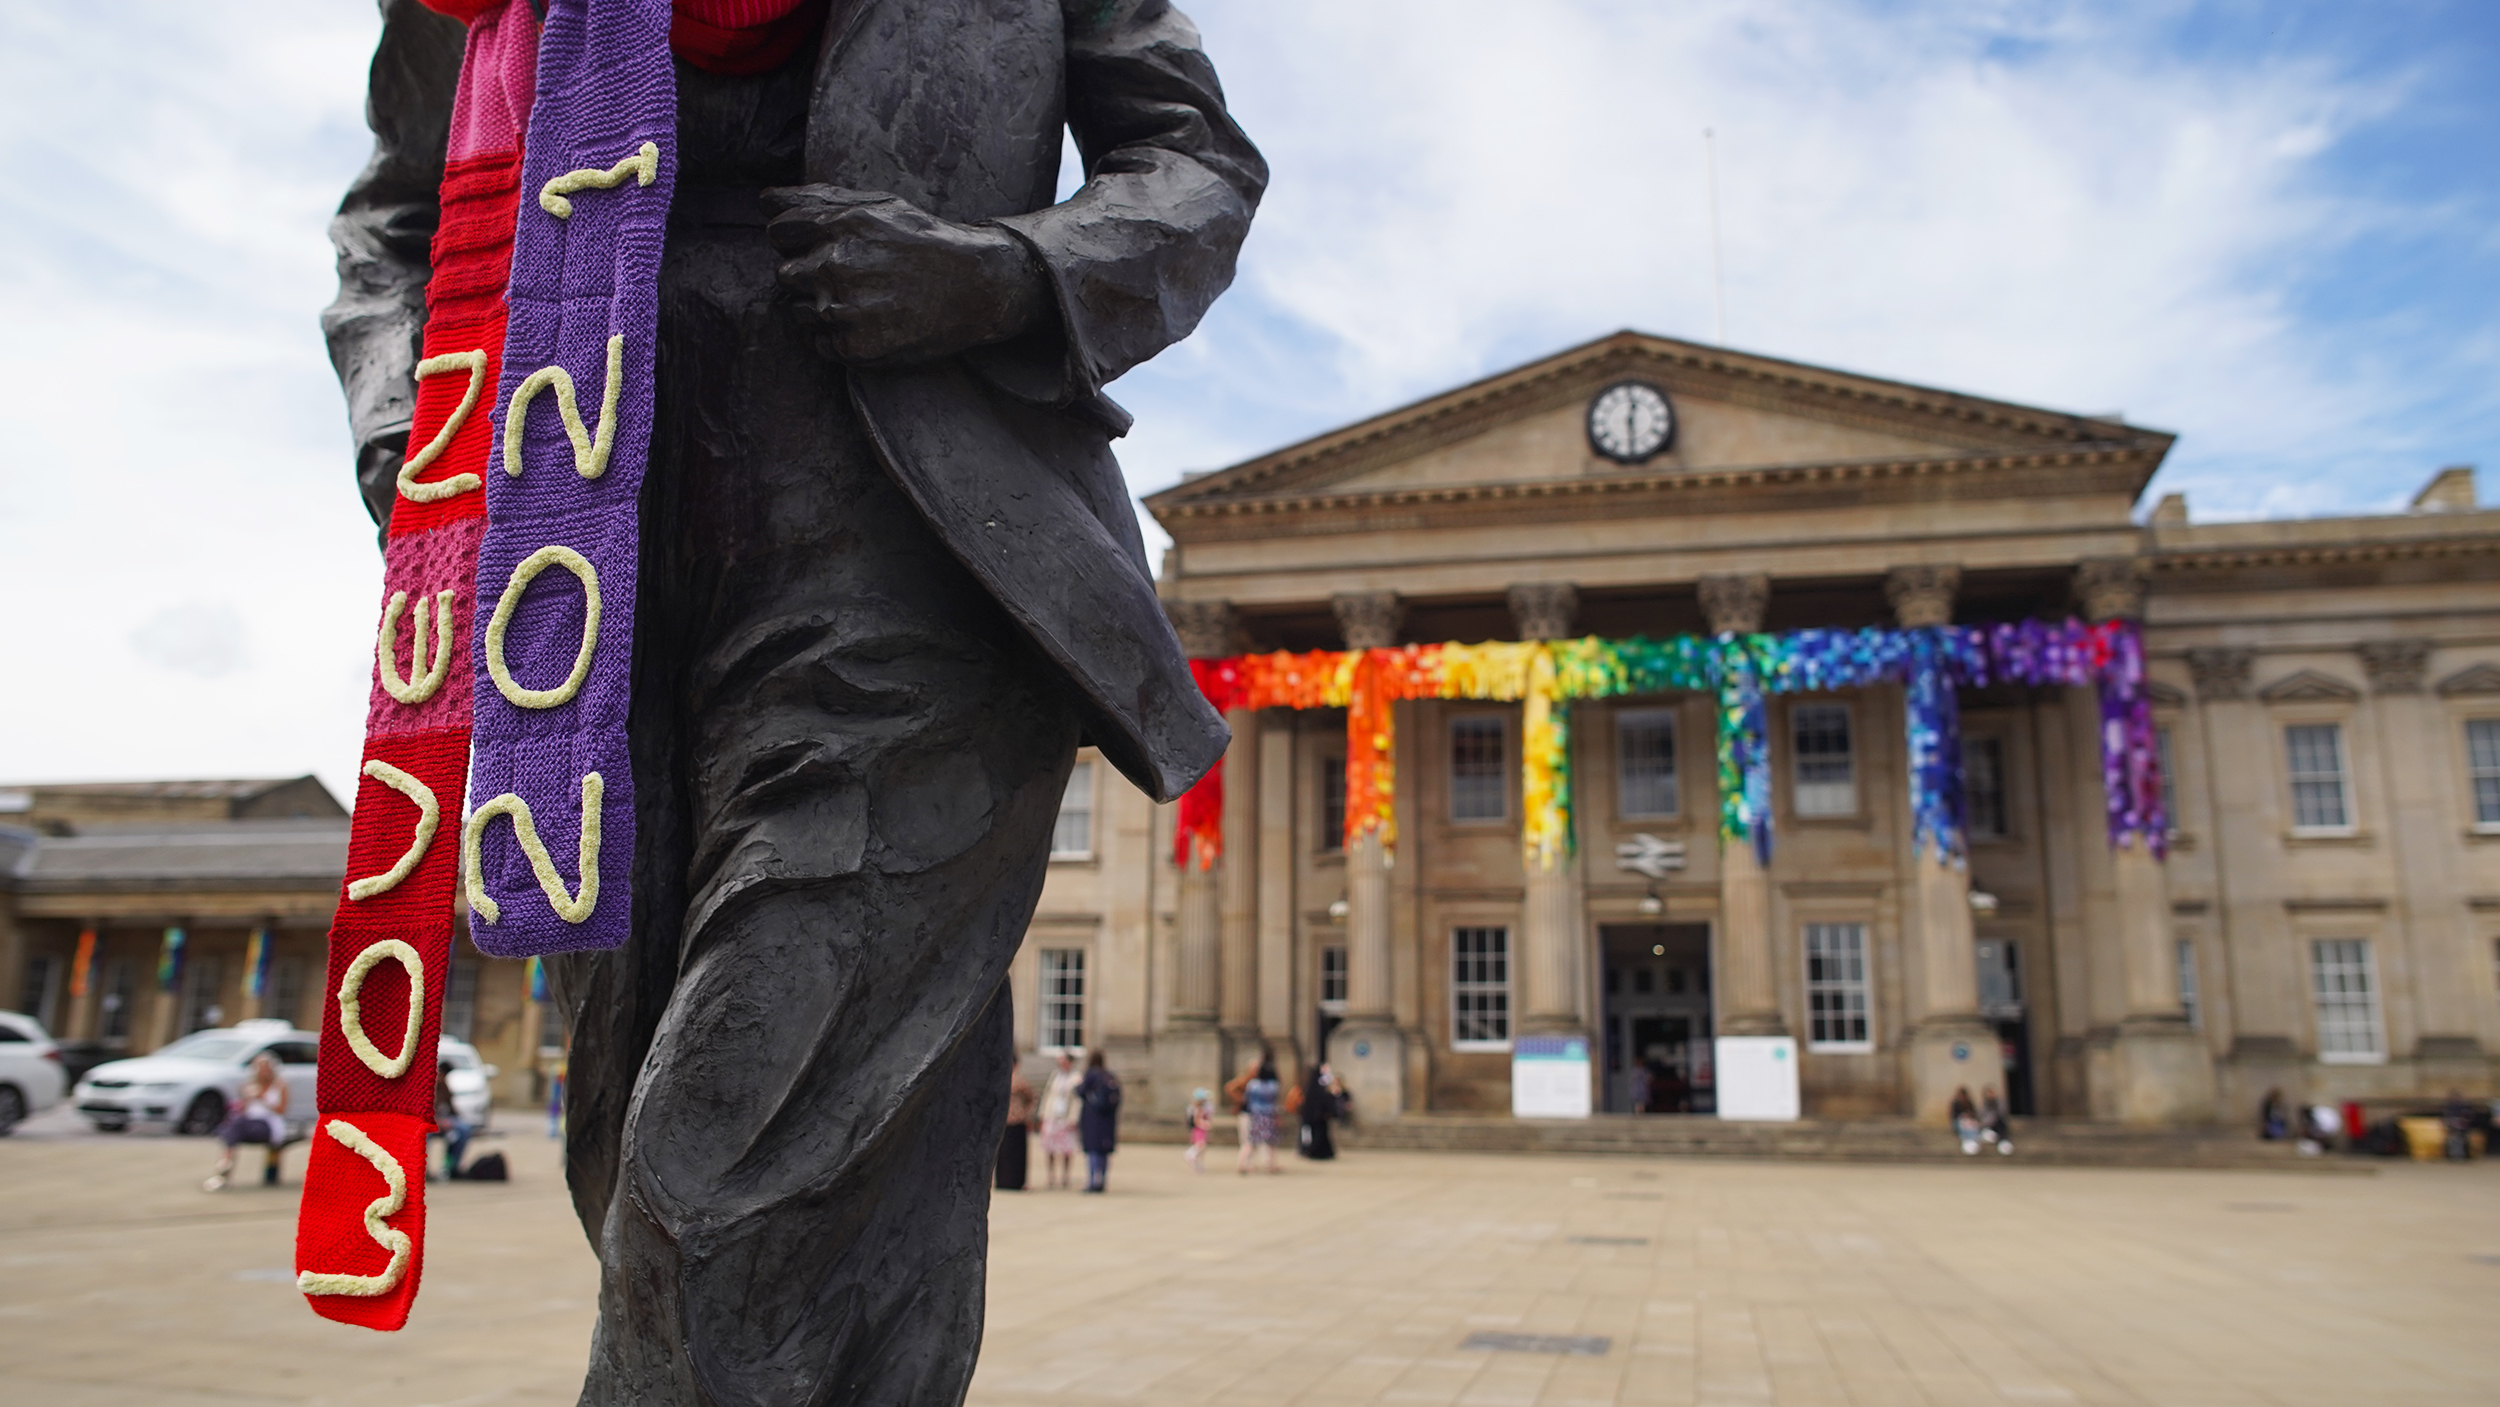 Front of Huddersfield Train Station in the background showing the knitted rainbow decoration on the pillars with a statue in the foreground wearing a knitted WOVEN2021 scarf